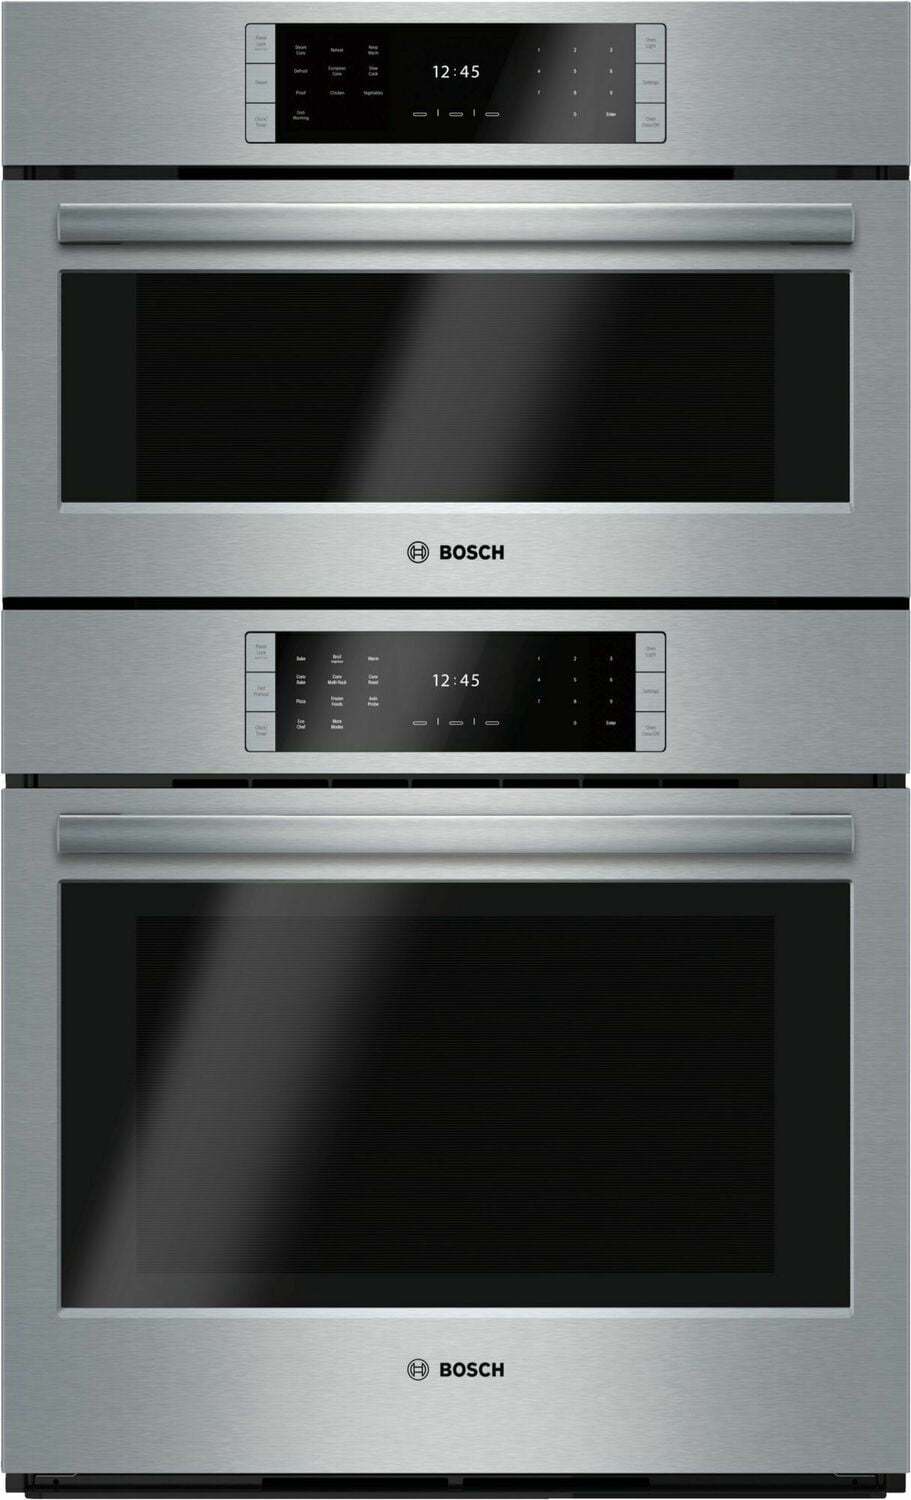 Bosch HSLP751UC Benchmark Series, 30" Combo, Upper: Steam Convection, Lower: Eu Conv, Tft Touch Control